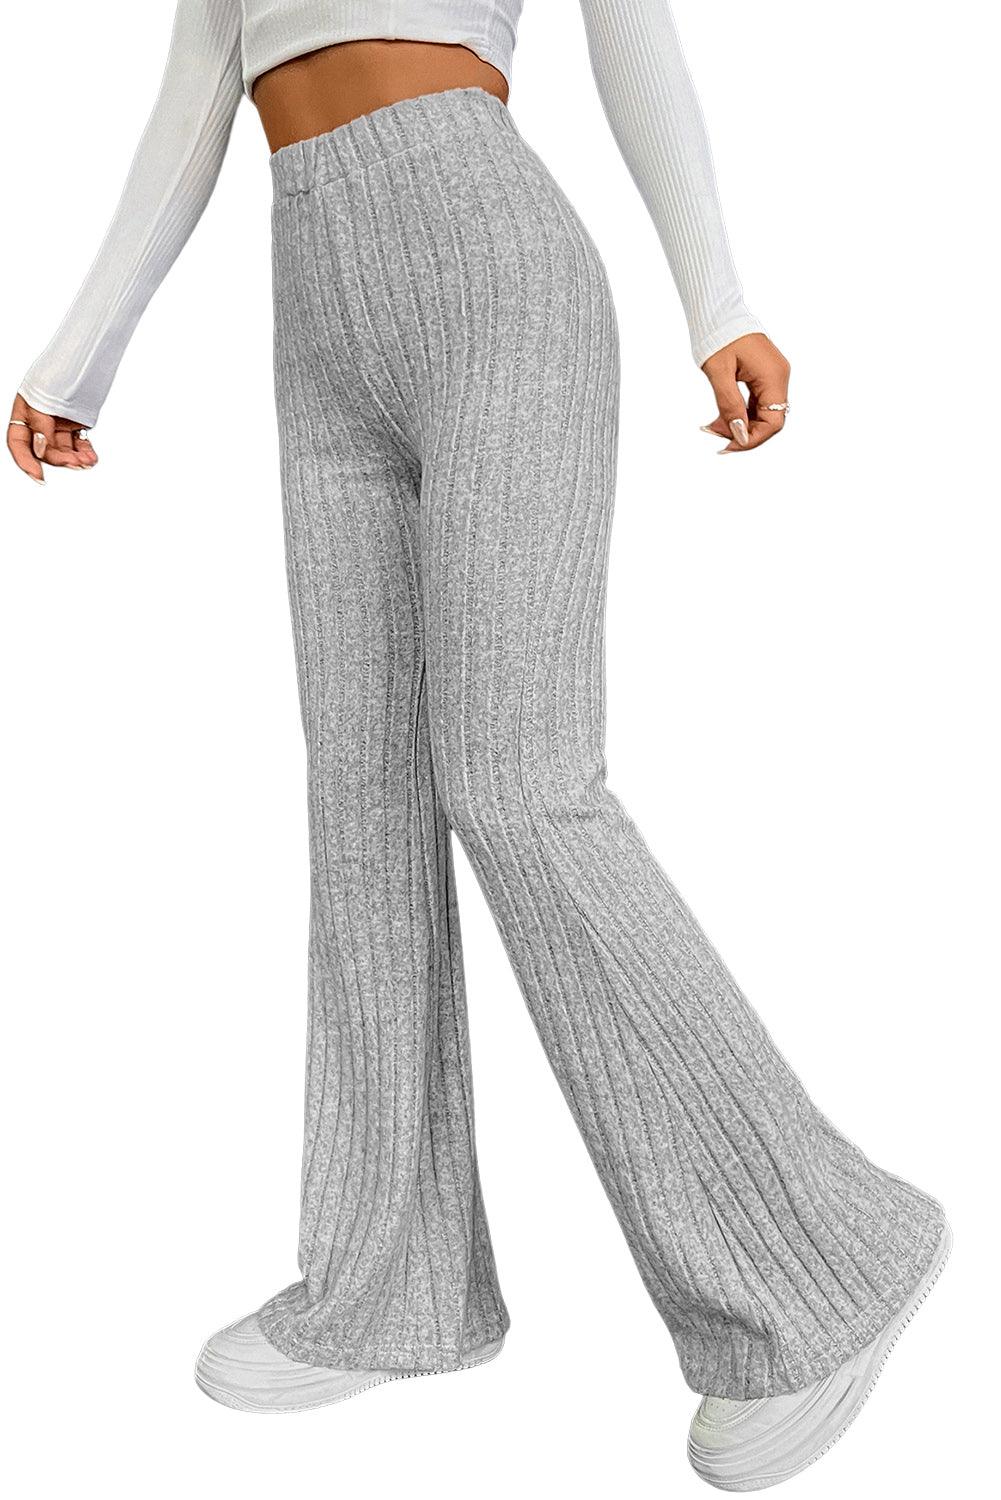 Gray Solid Color High Waist Ribbed Flare Pants - L & M Kee, LLC